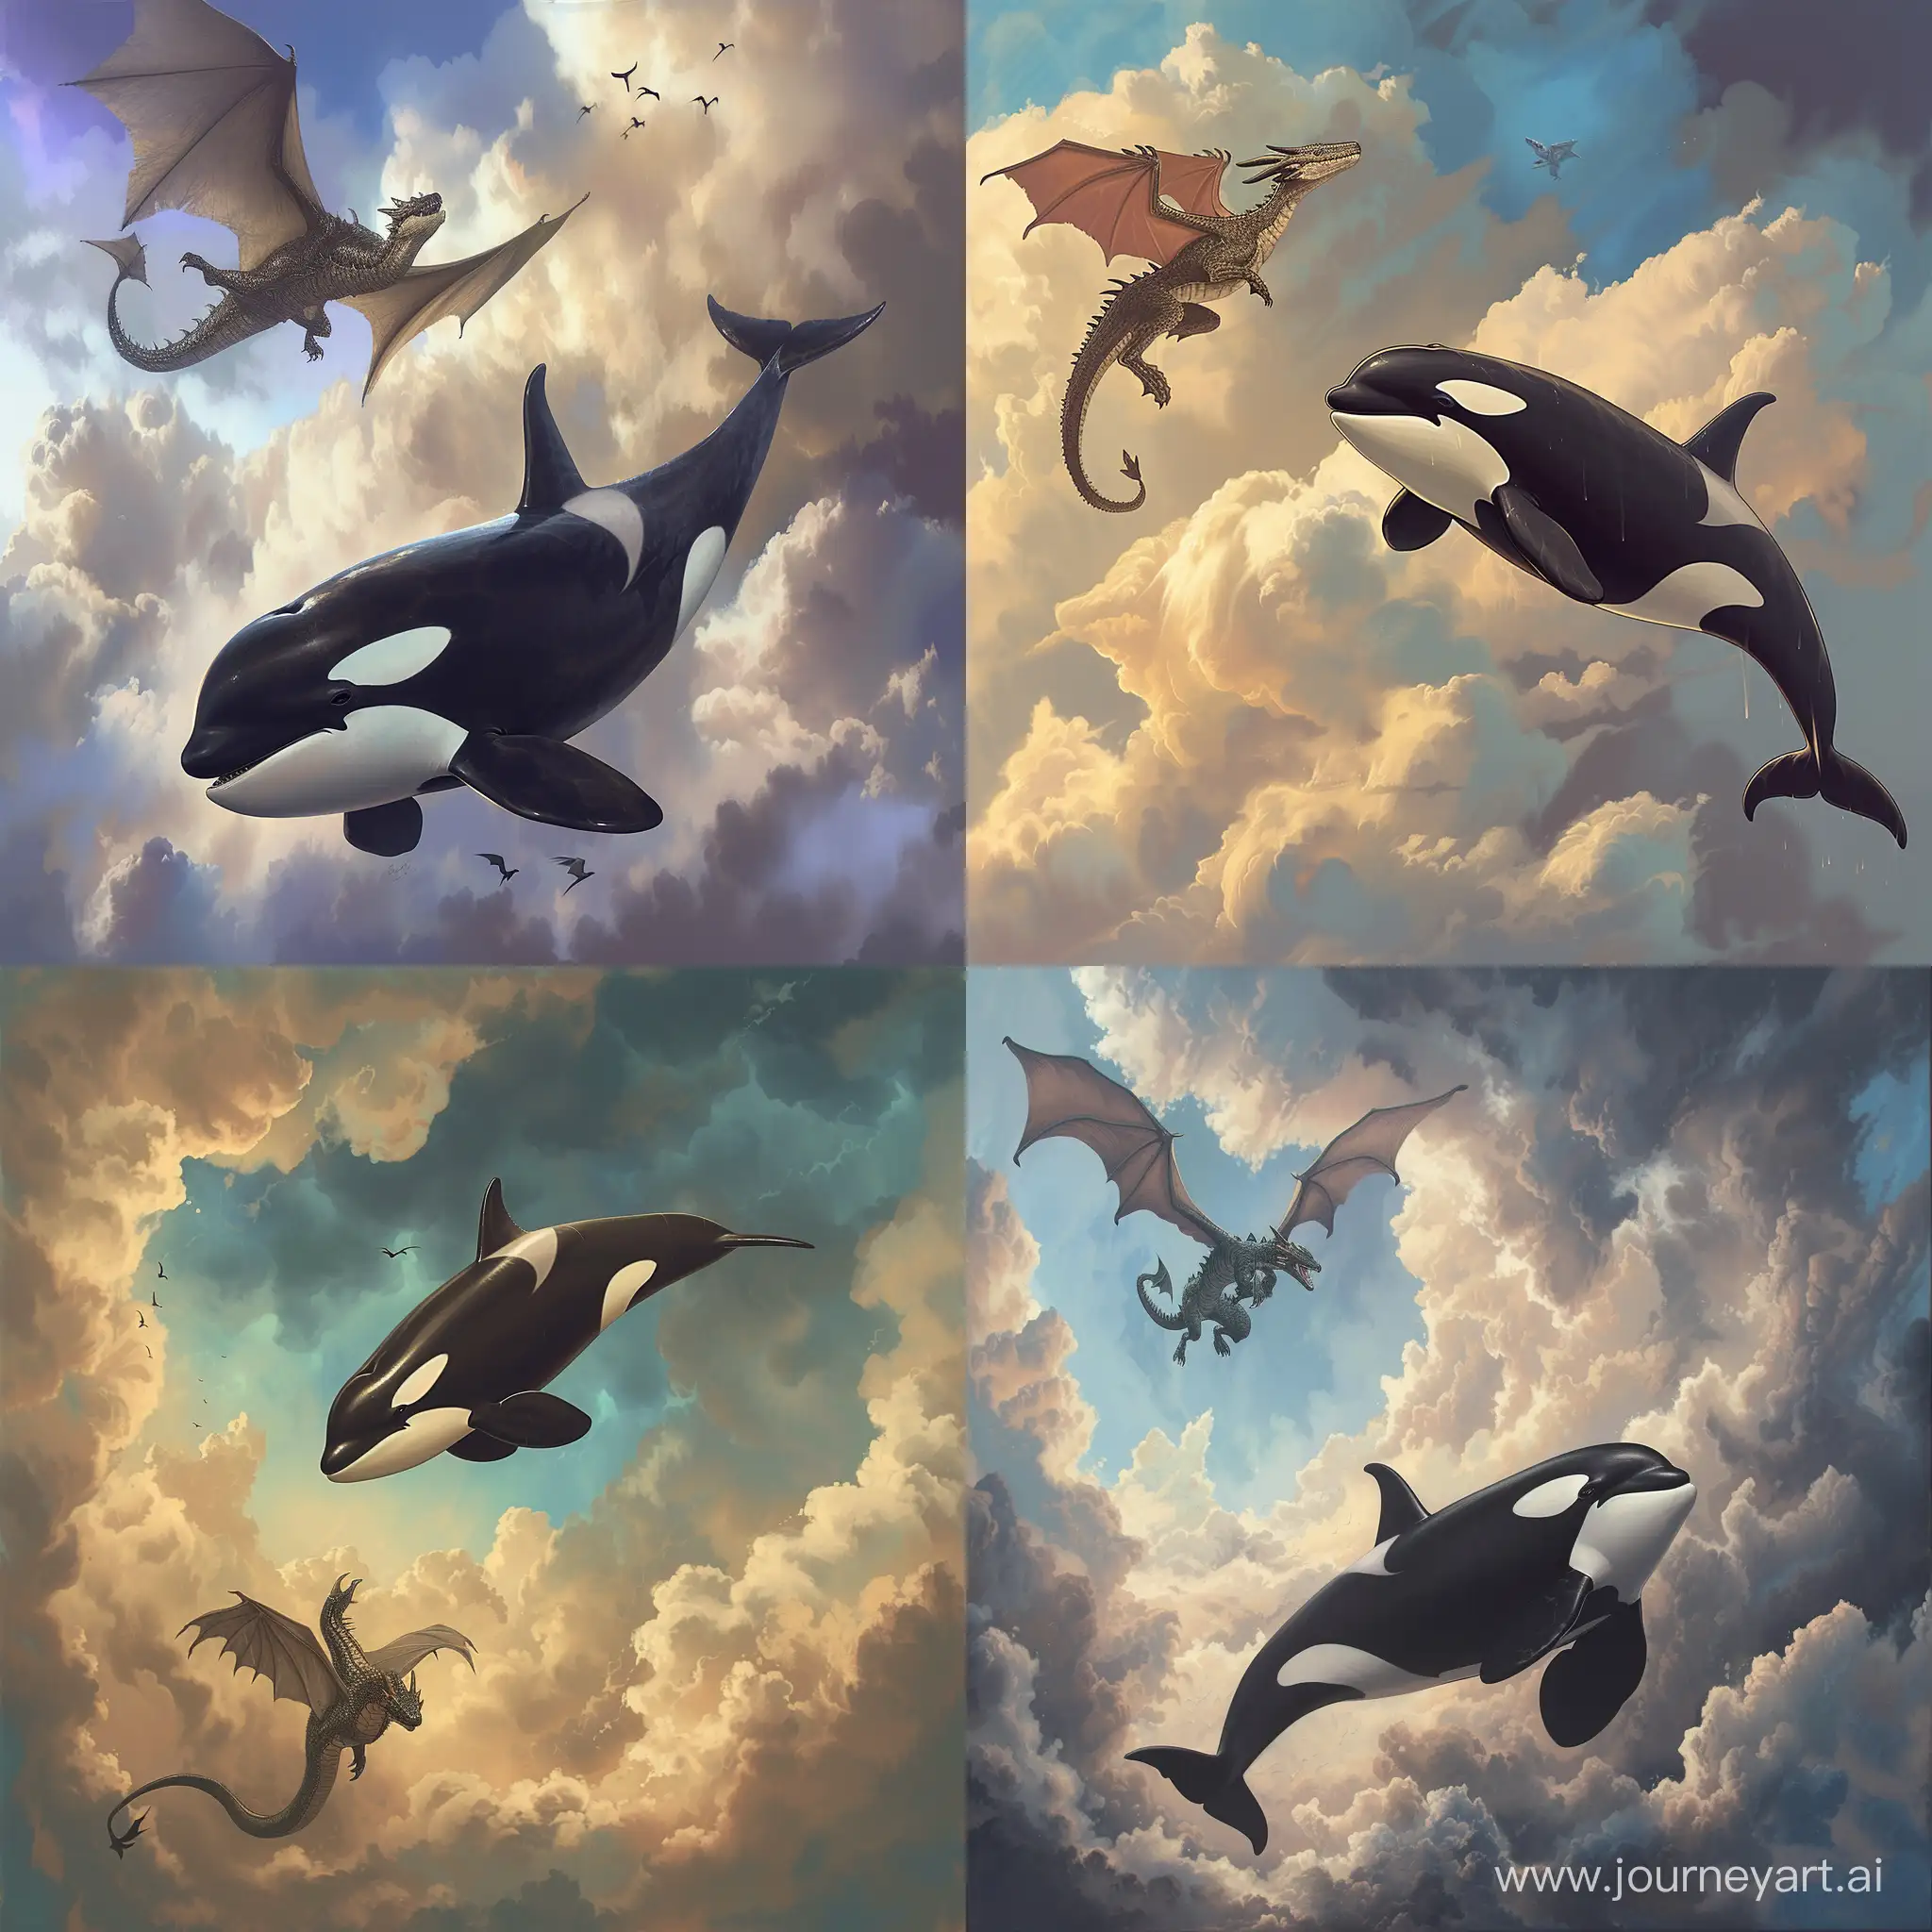 an orca whale, flying high in the clouds and being followed closely by a dragon